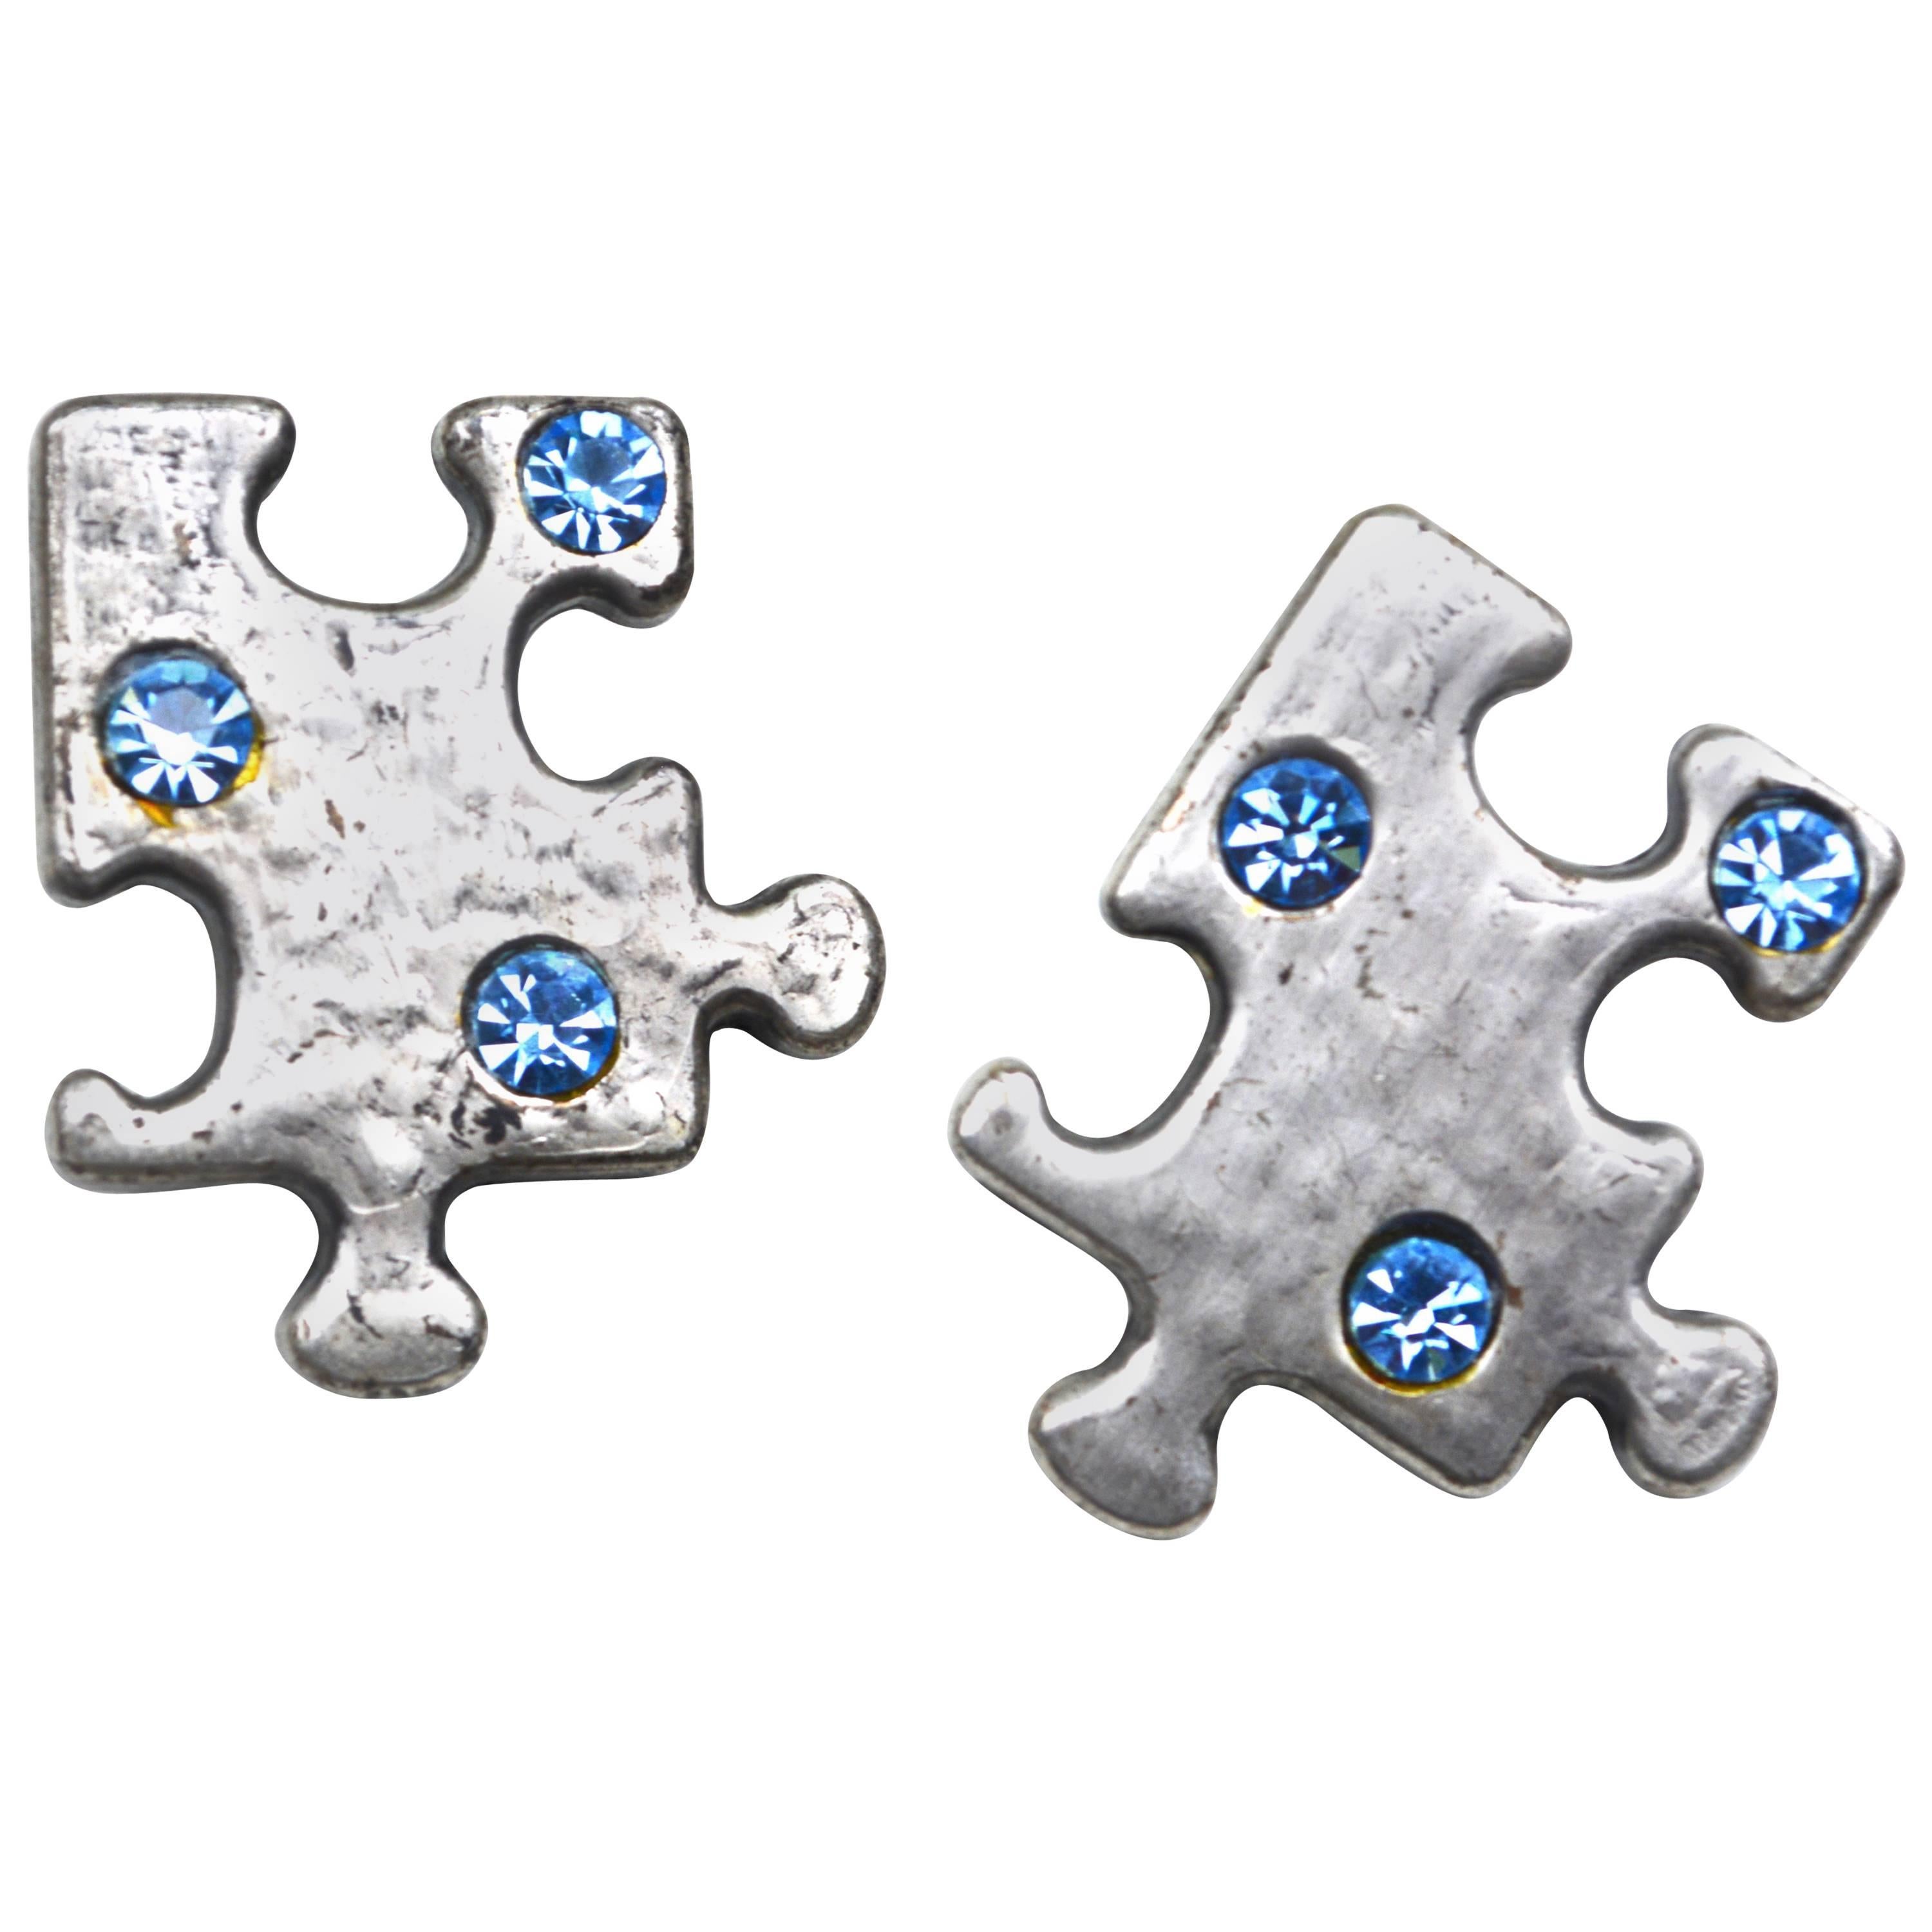 BillyBoy* Puzzle Piece Earrings  For Sale